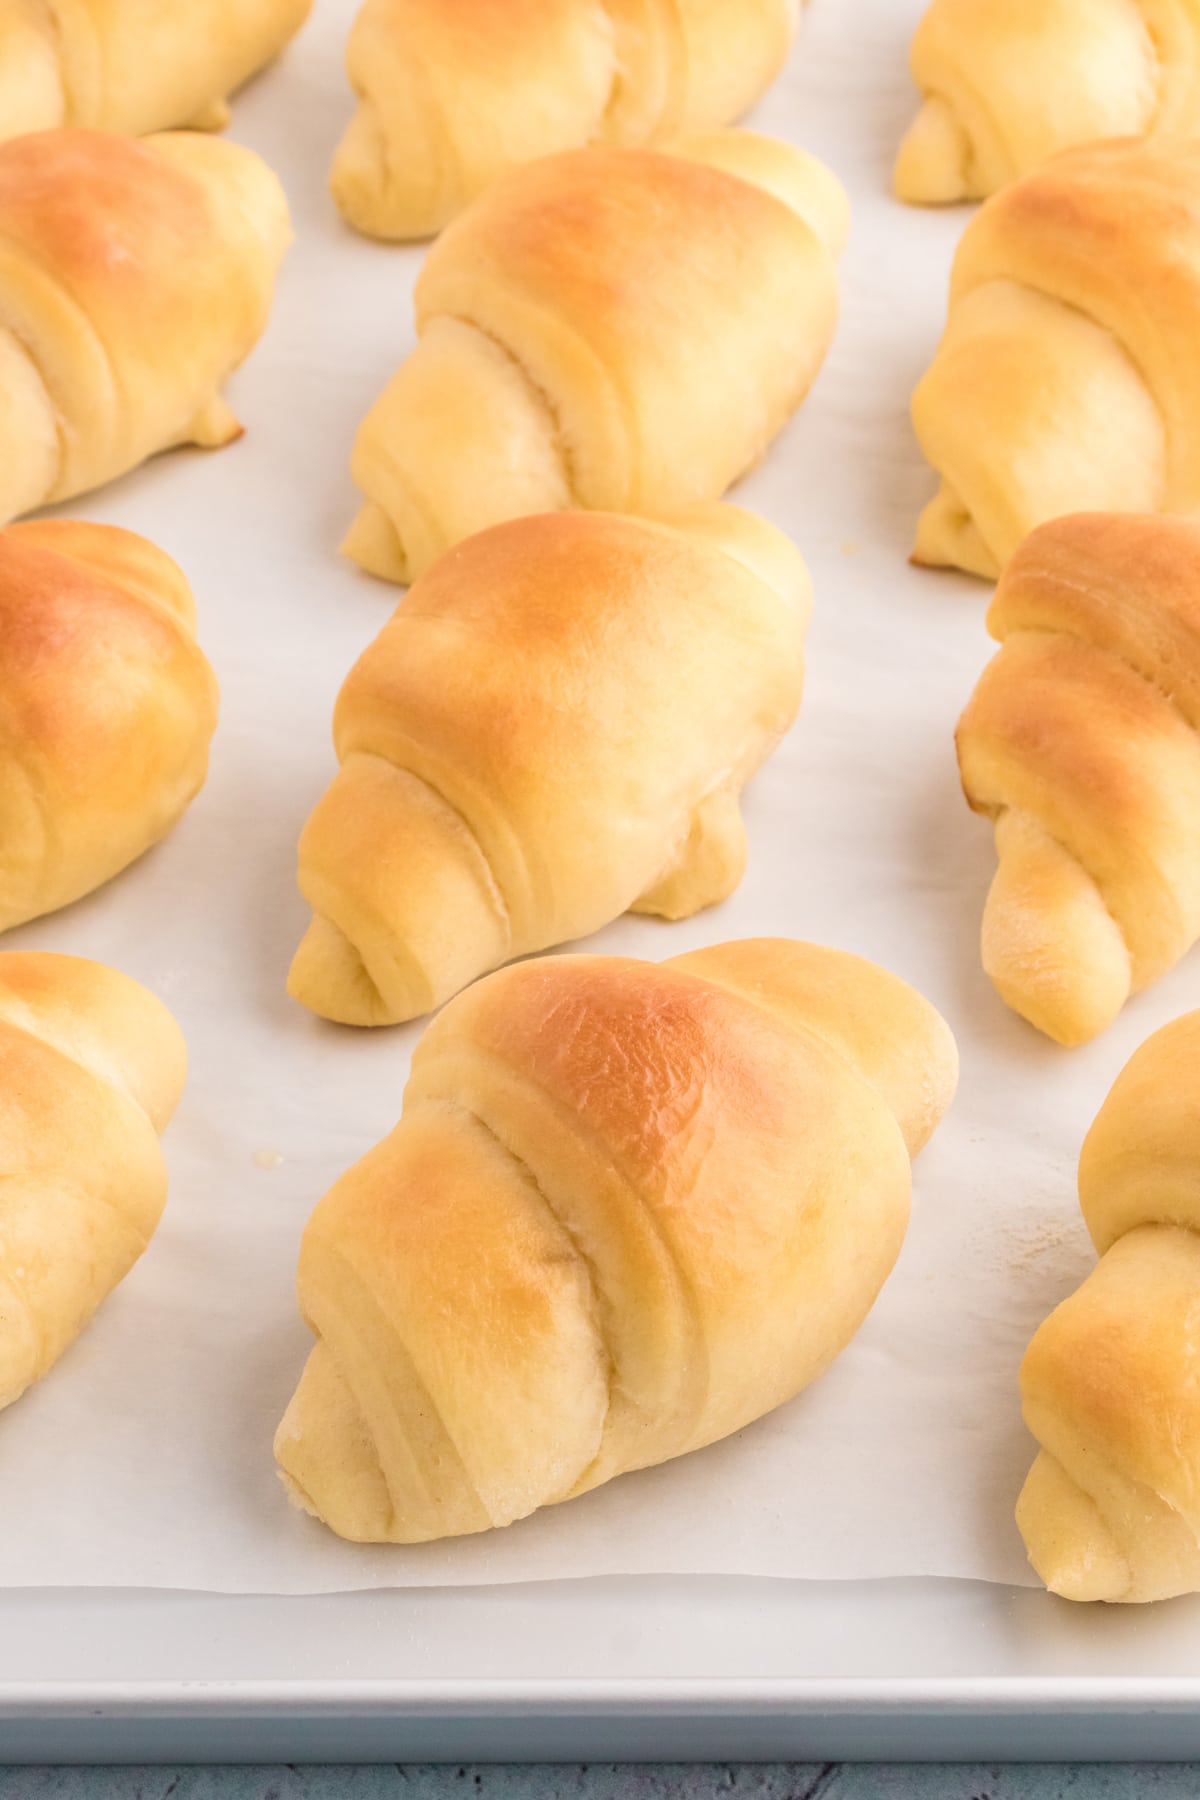 Angled view of a baking sheet of homemade crescent rolls